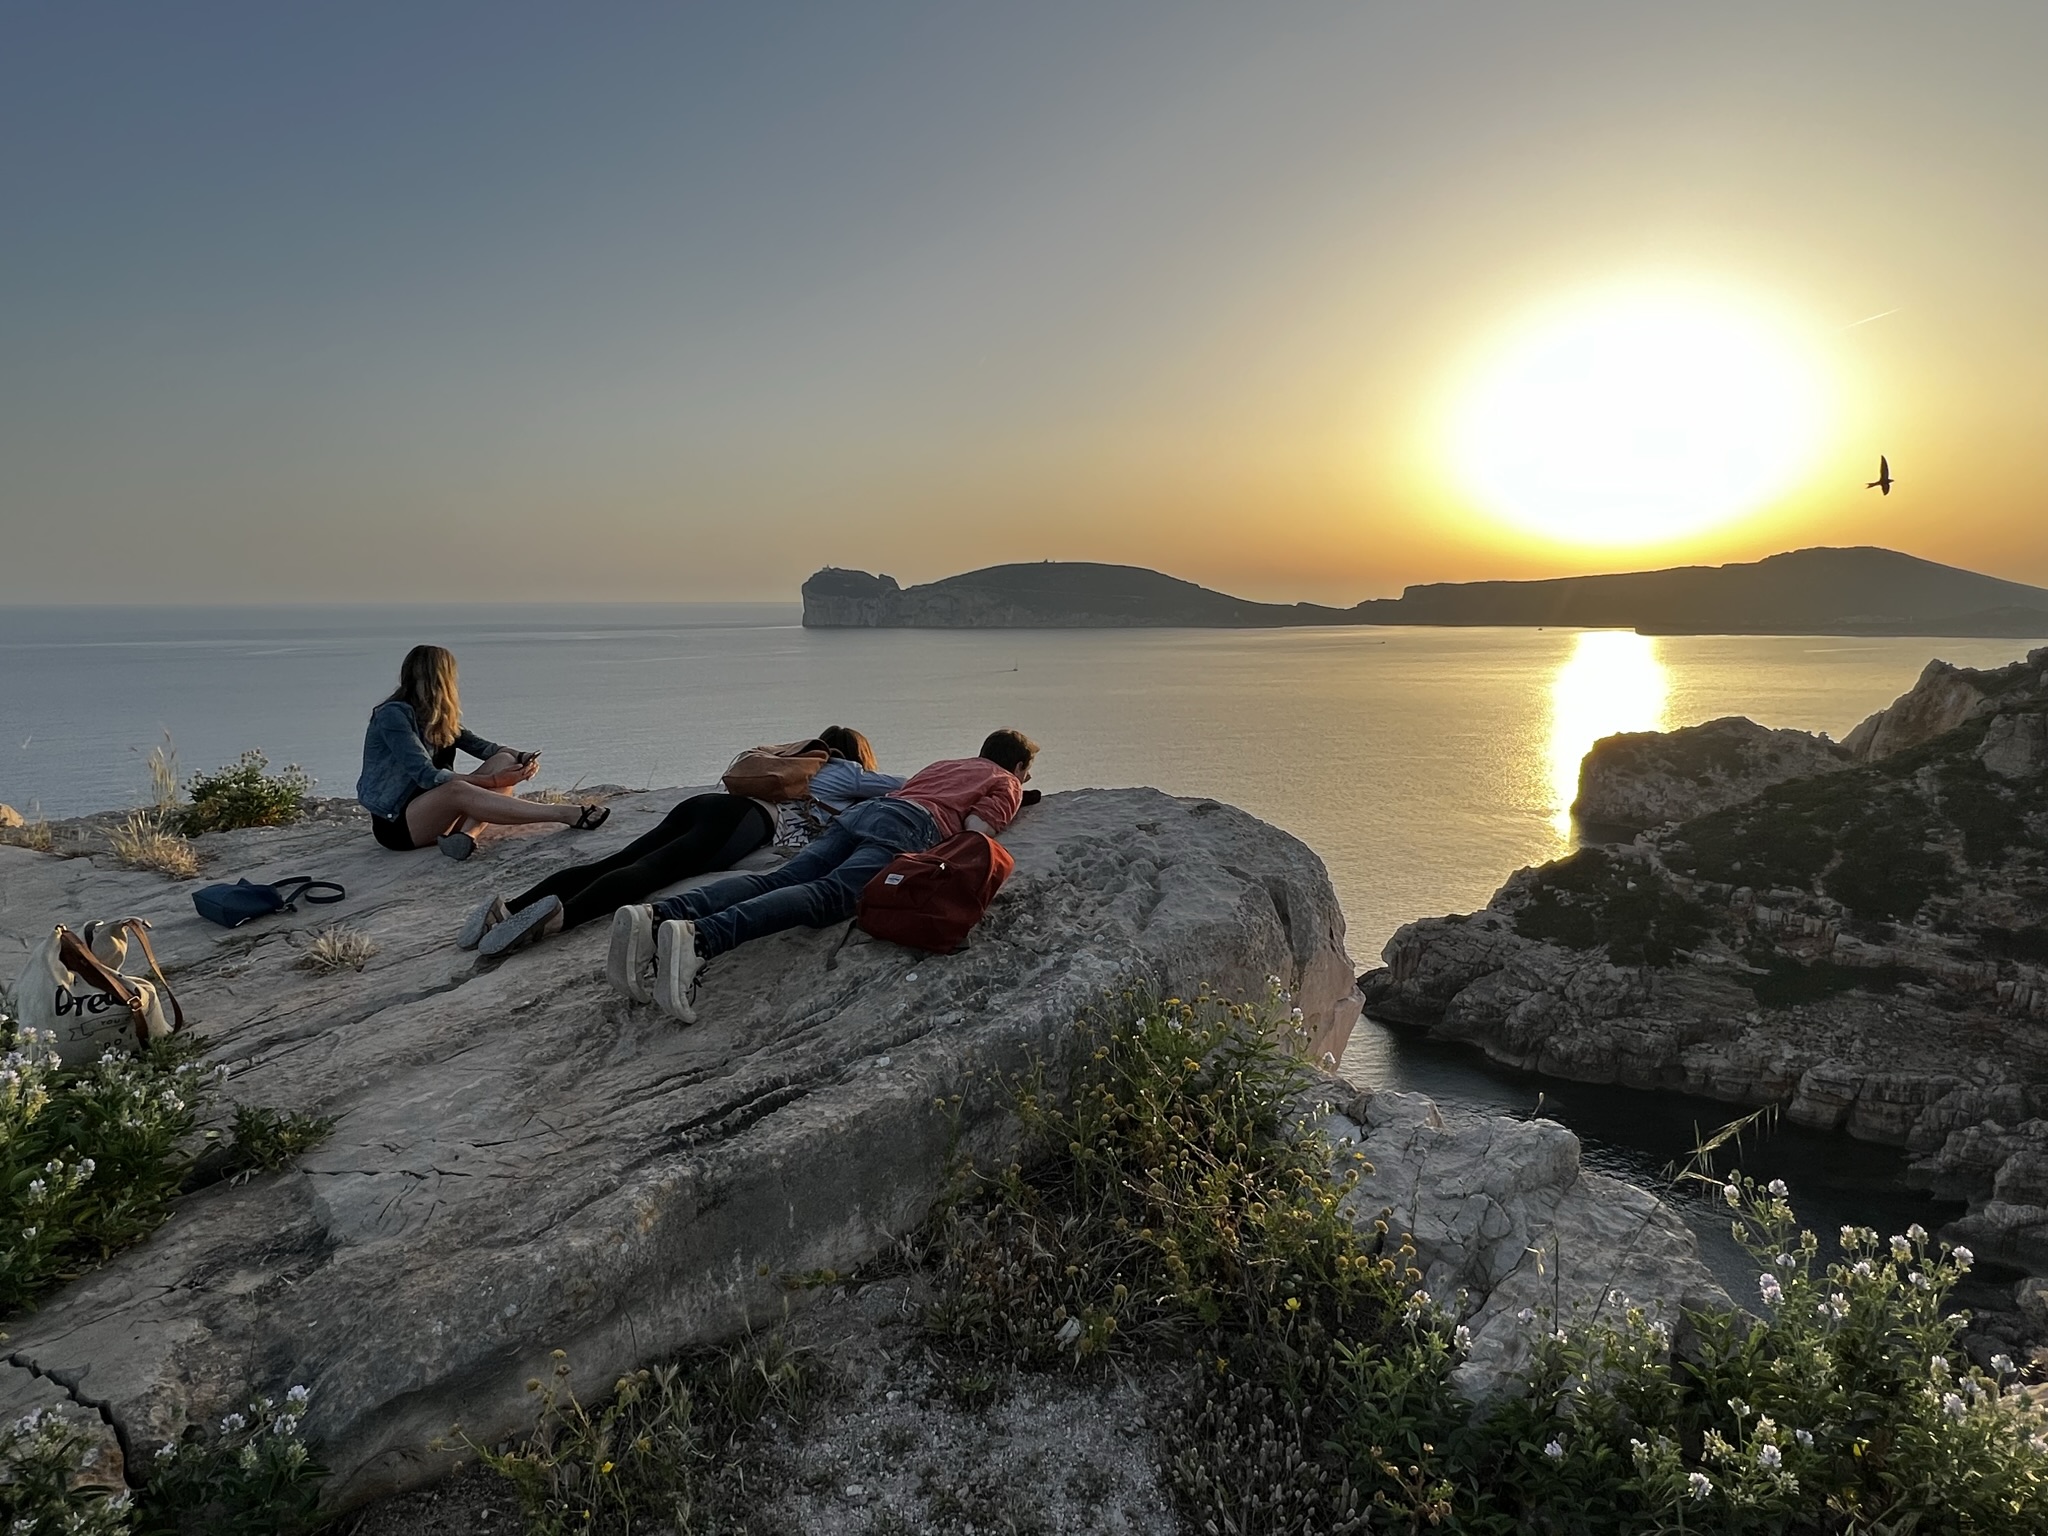 The Sunset Experience at Punta Giglio